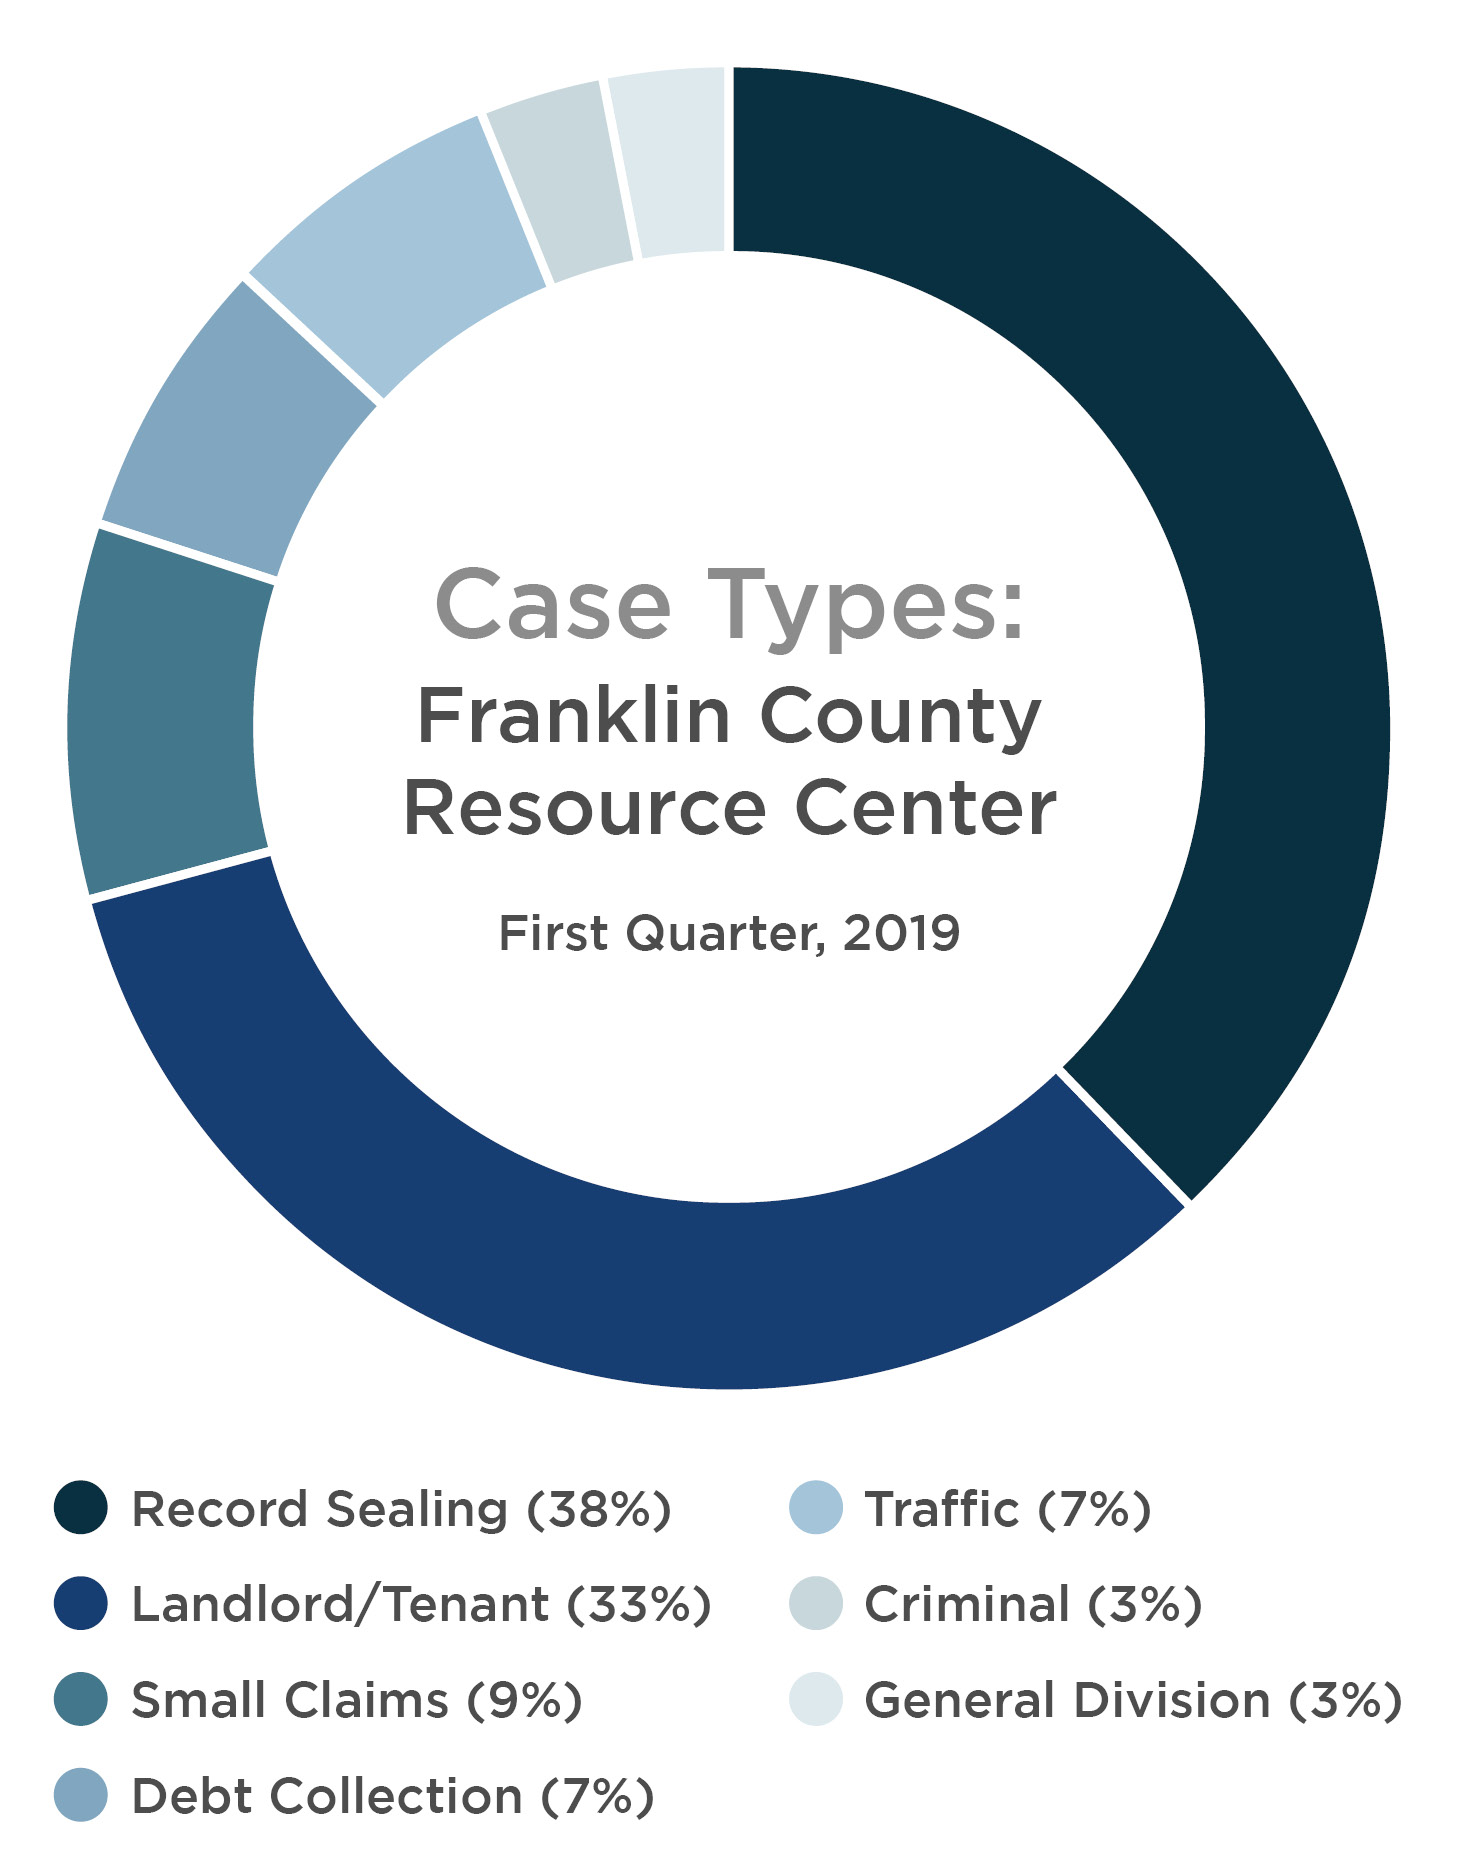 Image of a pie chart breaking down case types from the first quarter, 2019 at the Franklin County Resource Center